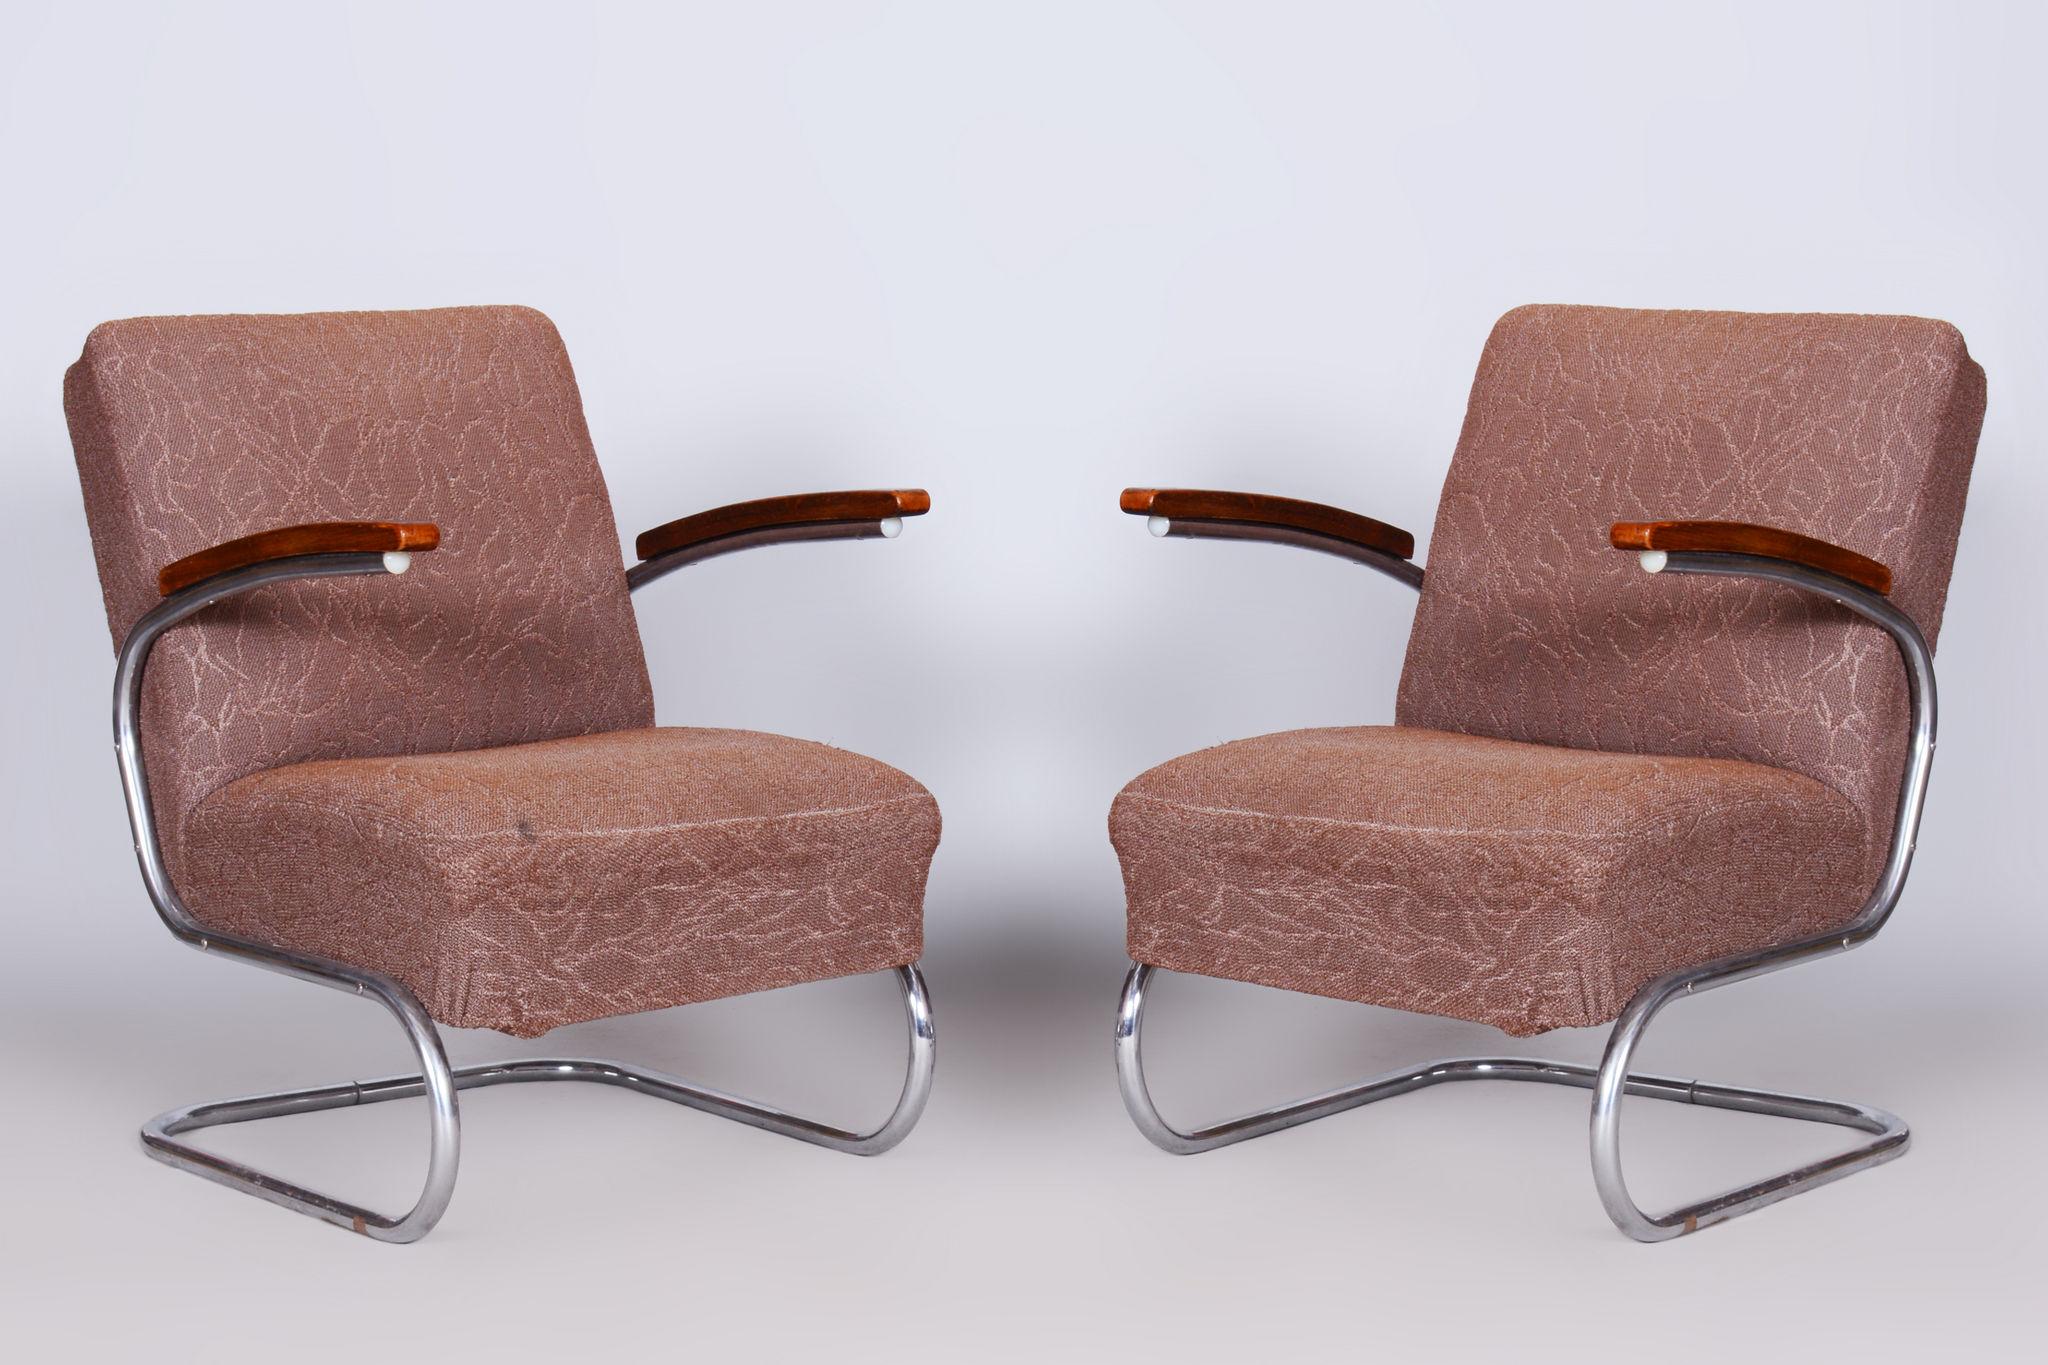 Restored Bauhaus Pair of Brown Armchairs by Mücke - Melder.

Period: 1930-1939
Maker: Mücke - Melder
Source: Czechia (Czechoslovakia)

According to the original process, our professional refurbishing team in Czechia has restored and reupholstered